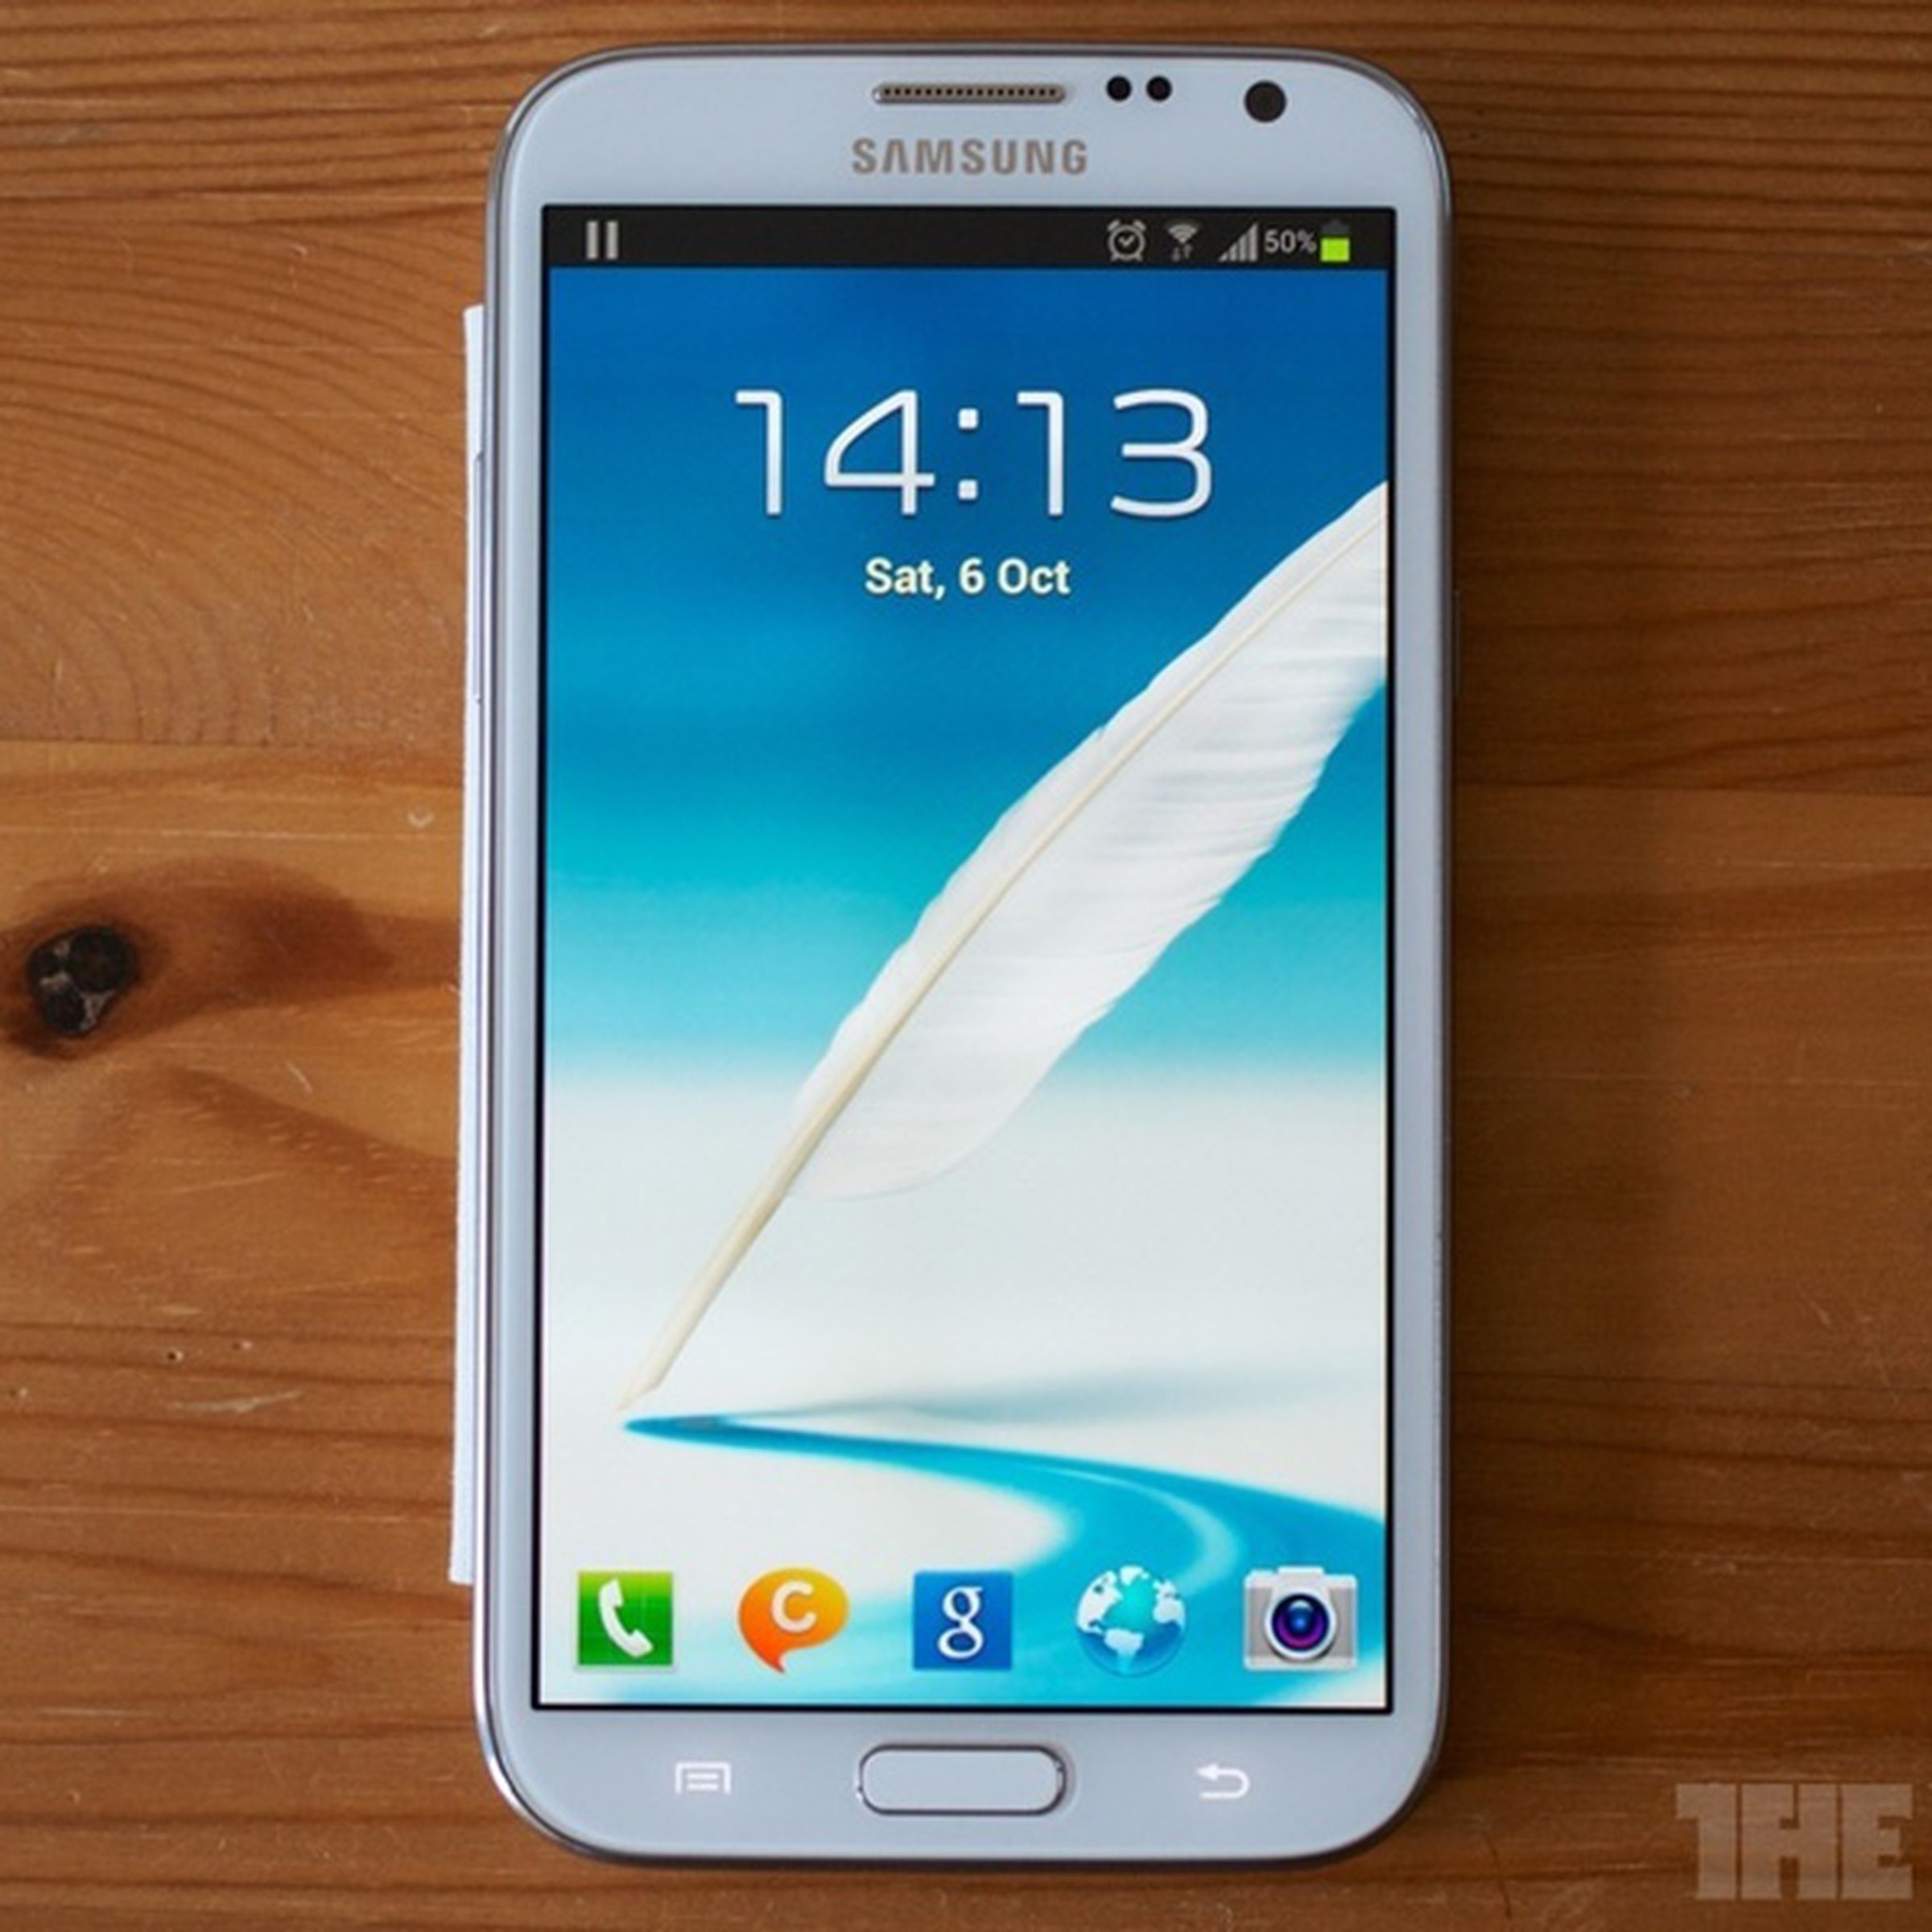 Galaxy Note II video review